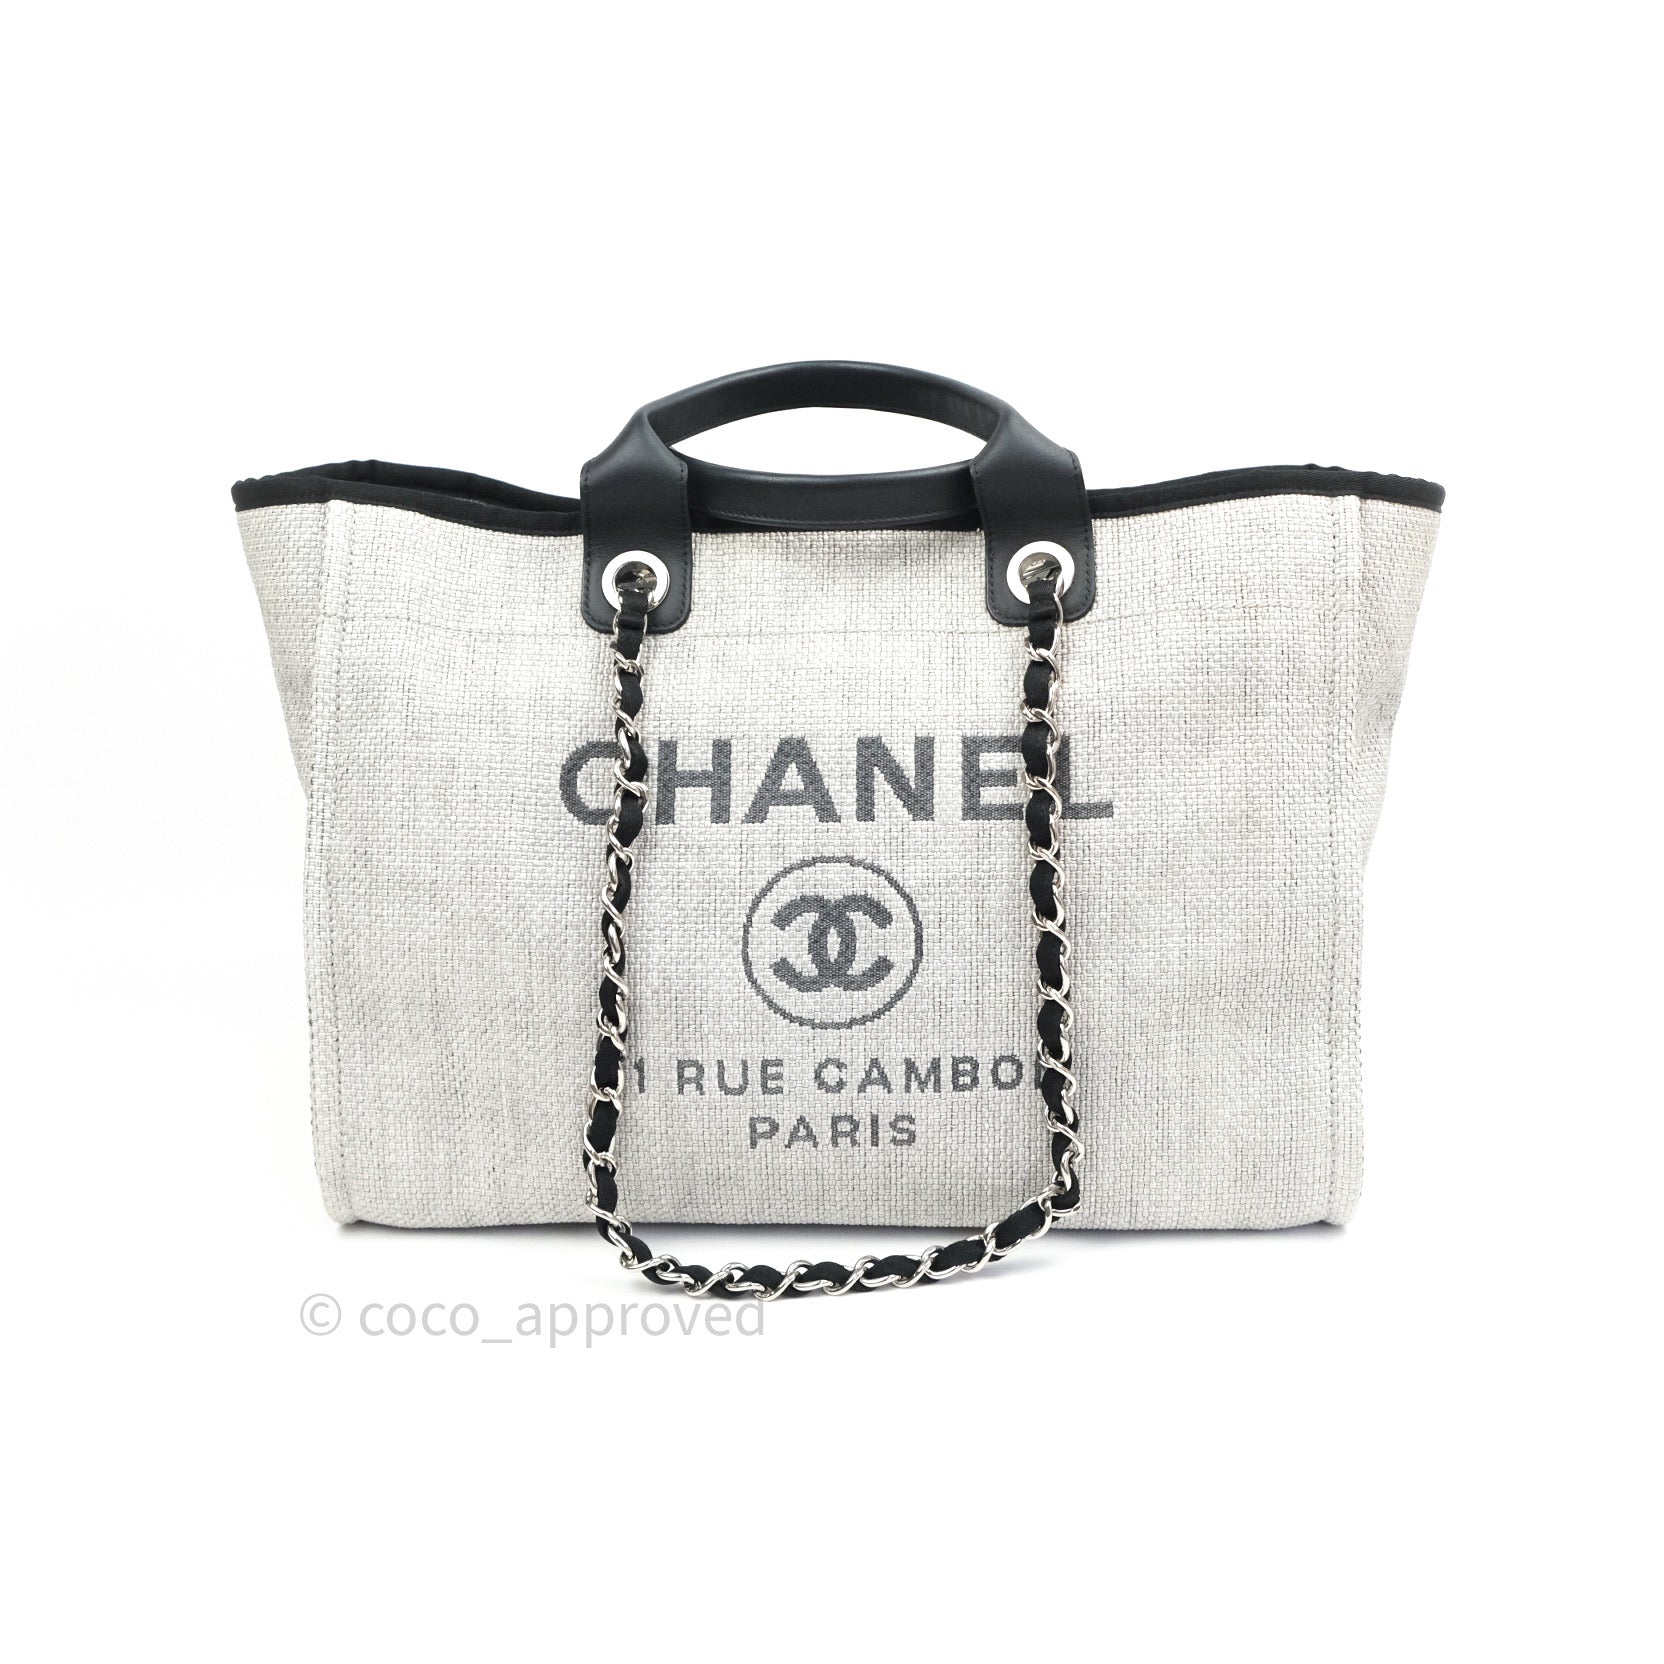 CHANEL, Bags, Auth Chanel Deauville Tote Grey Large Shopping Bag 222 22c